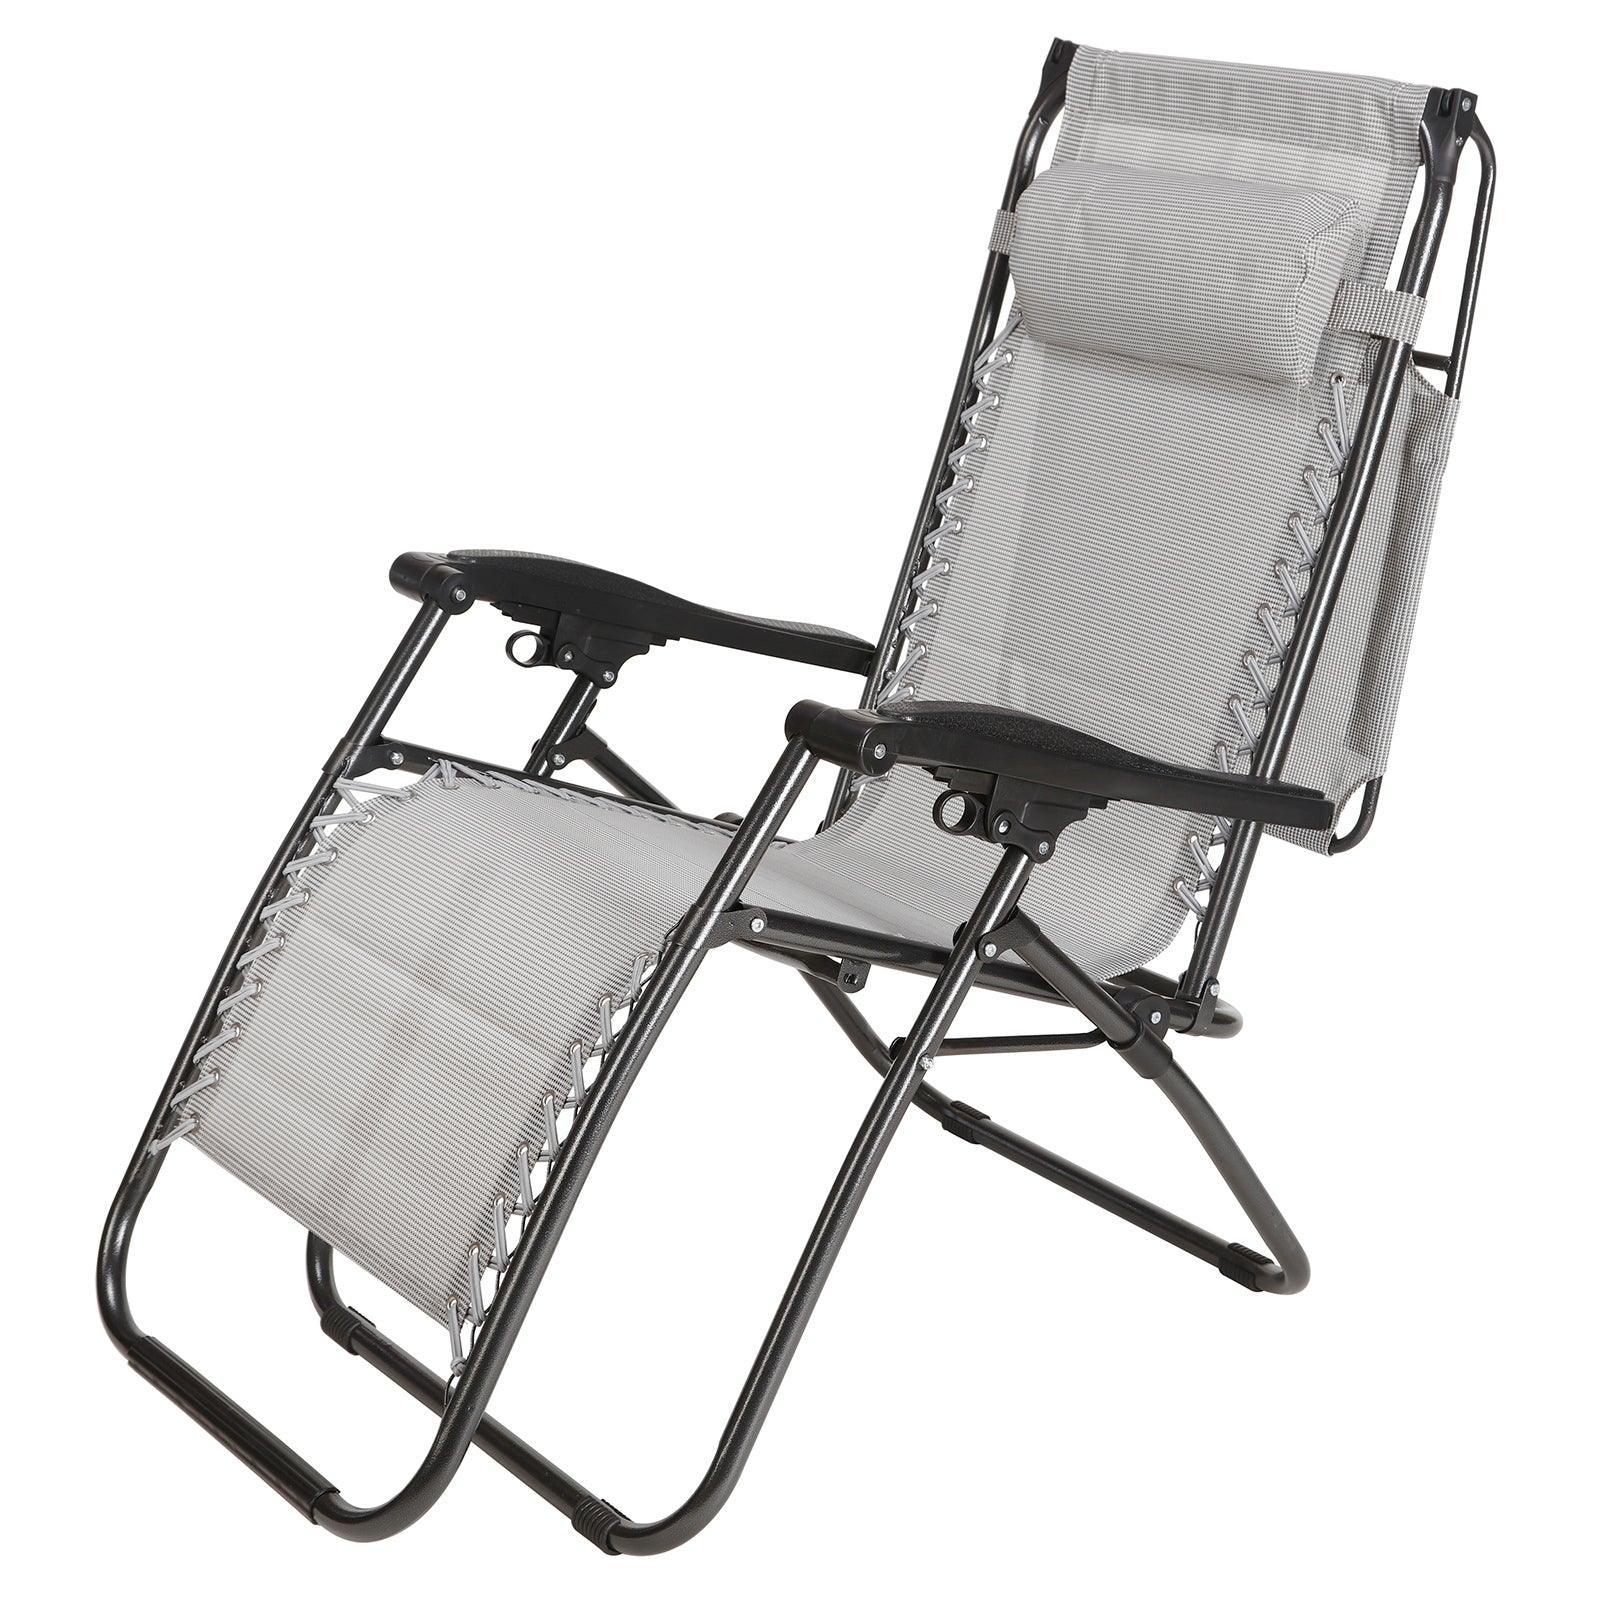 2 Grey Beach Chairs With Cup / Magazine Holders - Charming Spaces